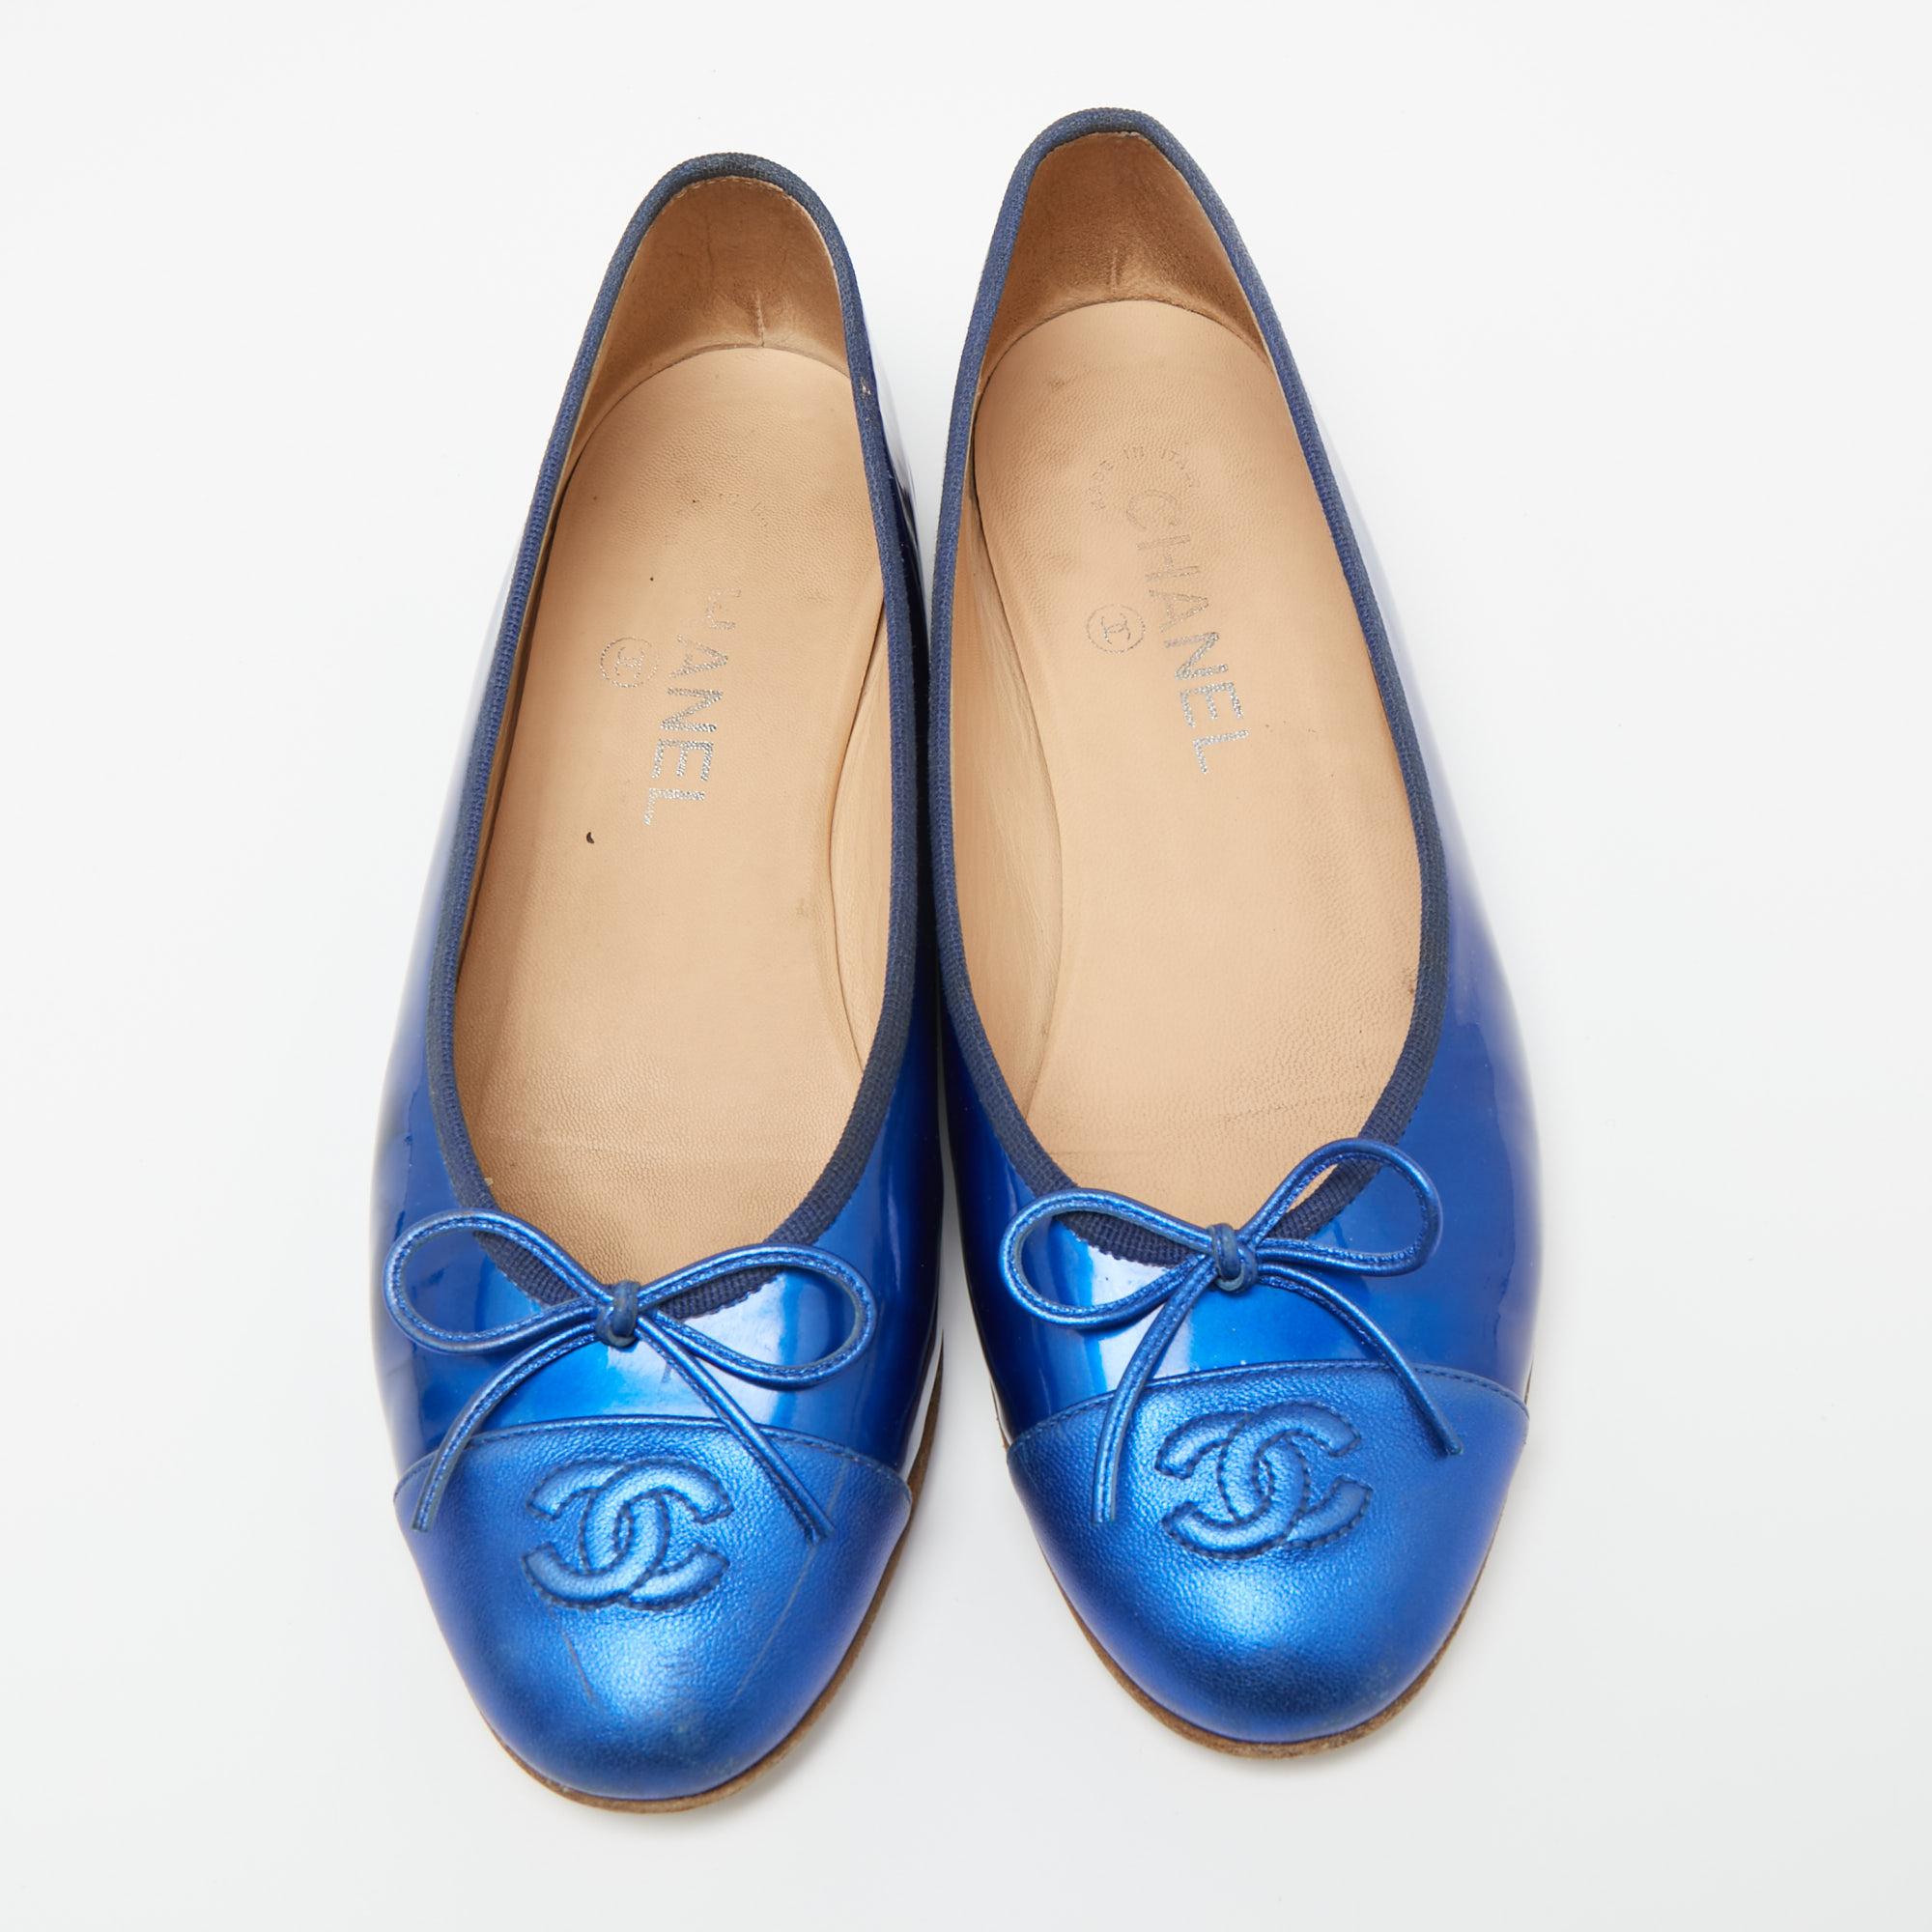 Women's Chanel Royal Blue Patent and Leather CC Cap-Toe Bow Ballet Flats Size 38.5